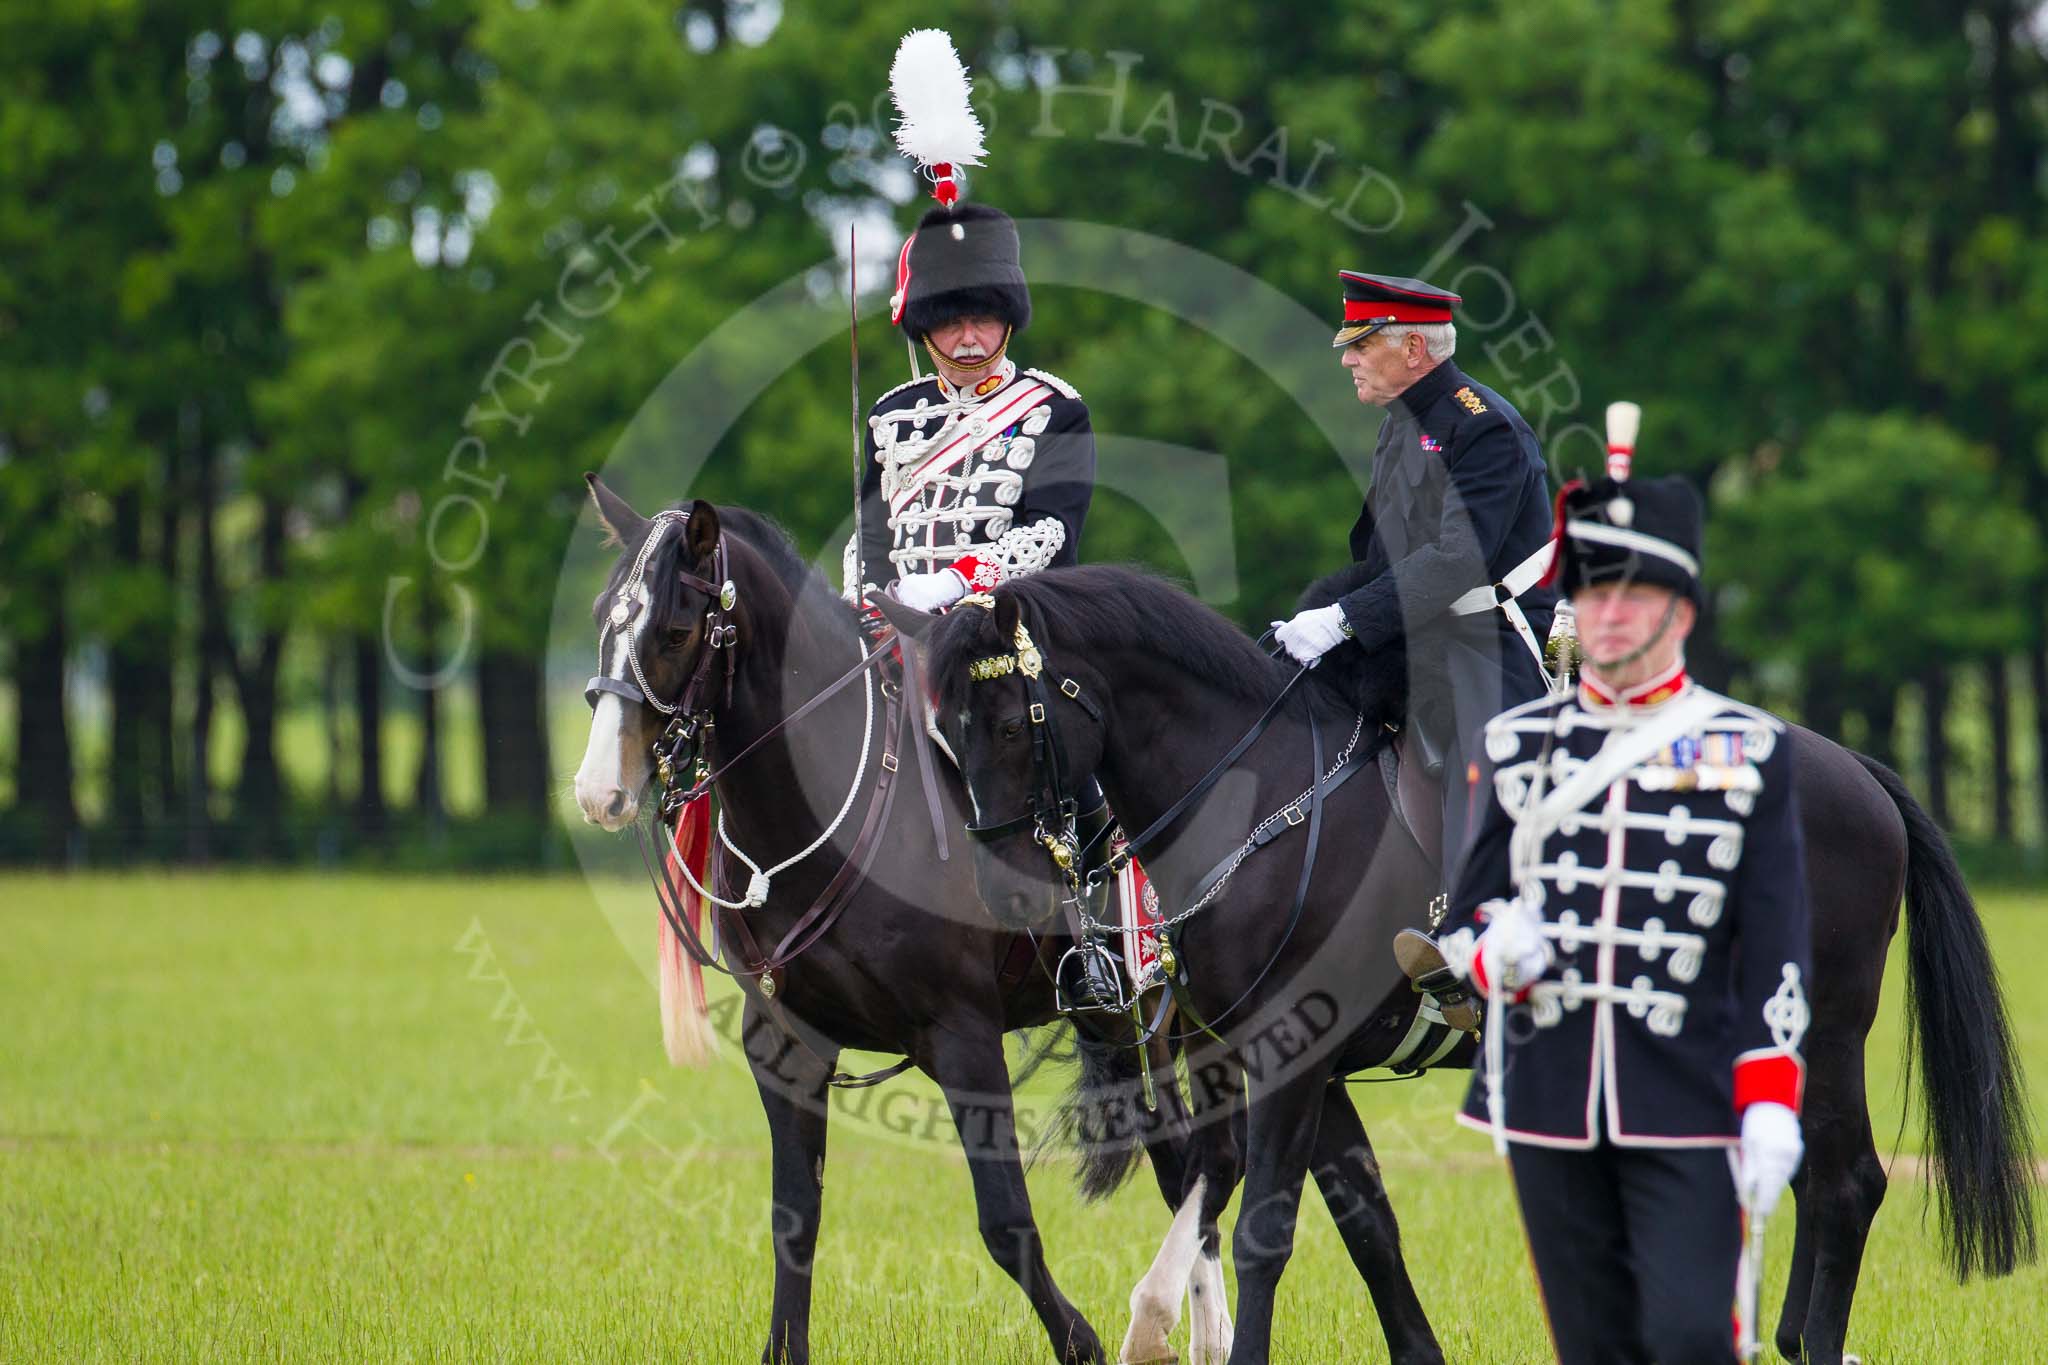 The Light Cavalry HAC Annual Review and Inspection 2013.
Windsor Great Park Review Ground,
Windsor,
Berkshire,
United Kingdom,
on 09 June 2013 at 13:27, image #361